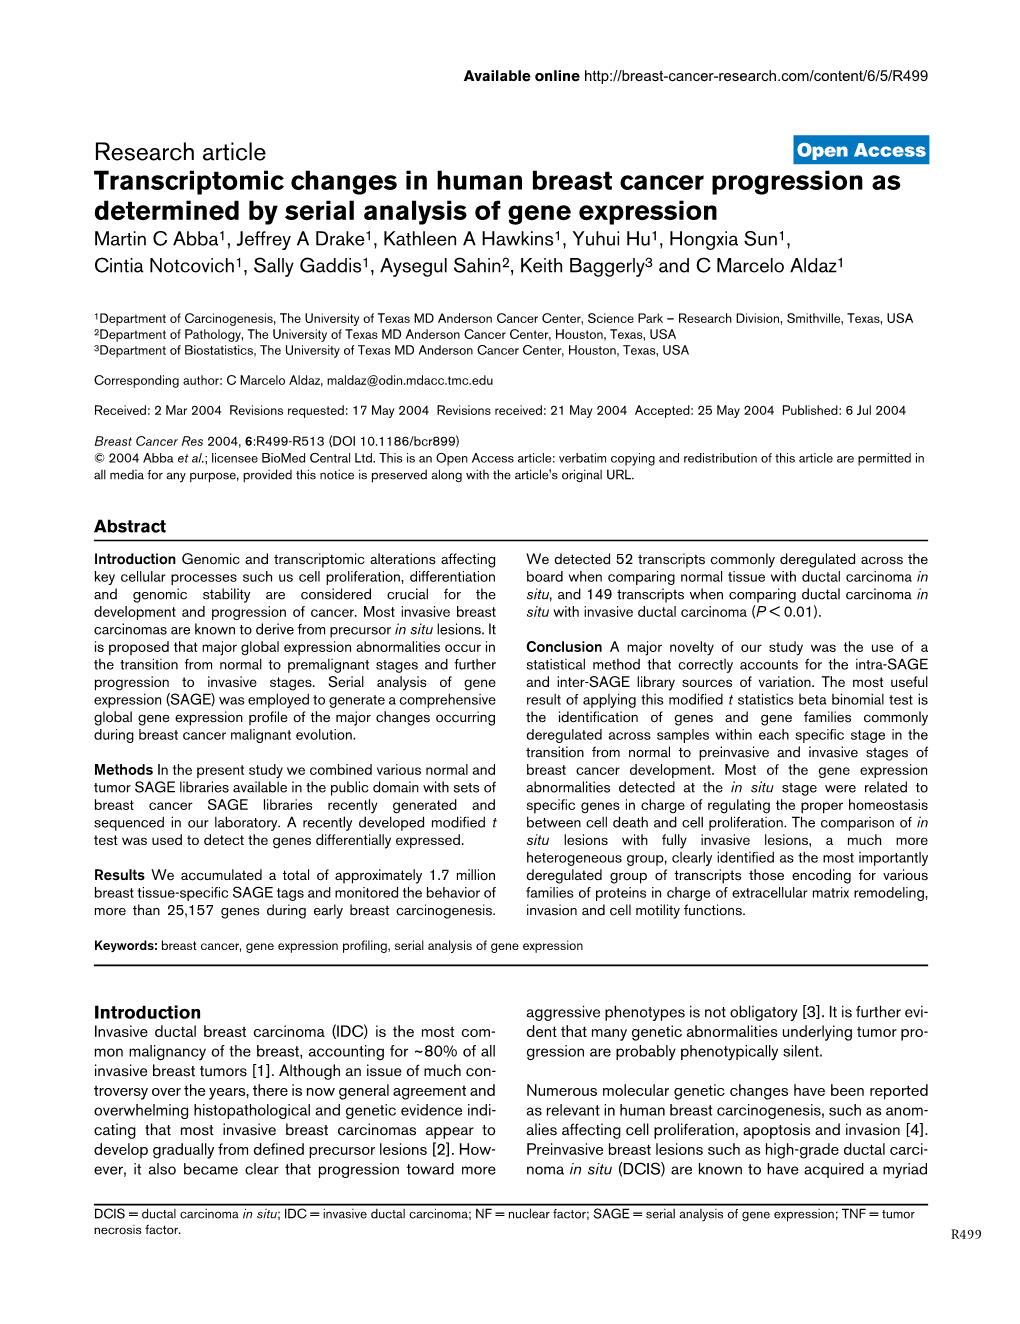 Transcriptomic Changes in Human Breast Cancer Progression As